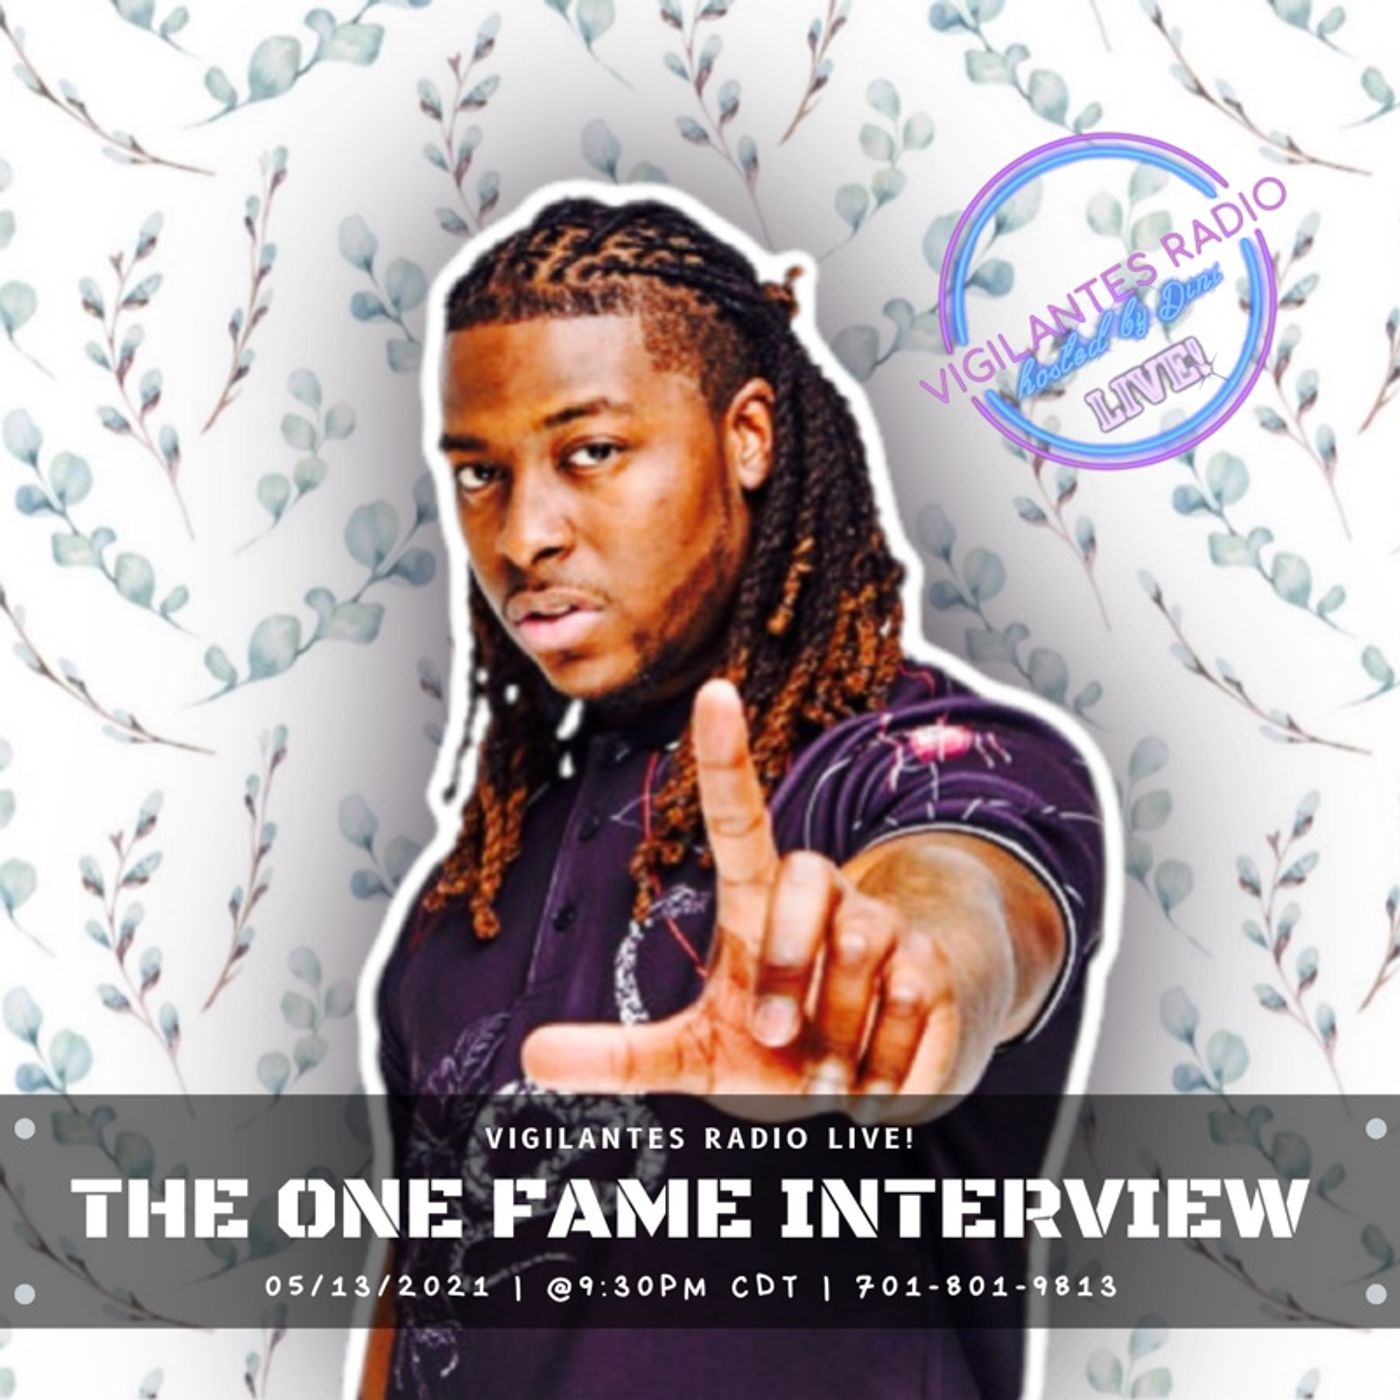 The One Fame Interview. Image